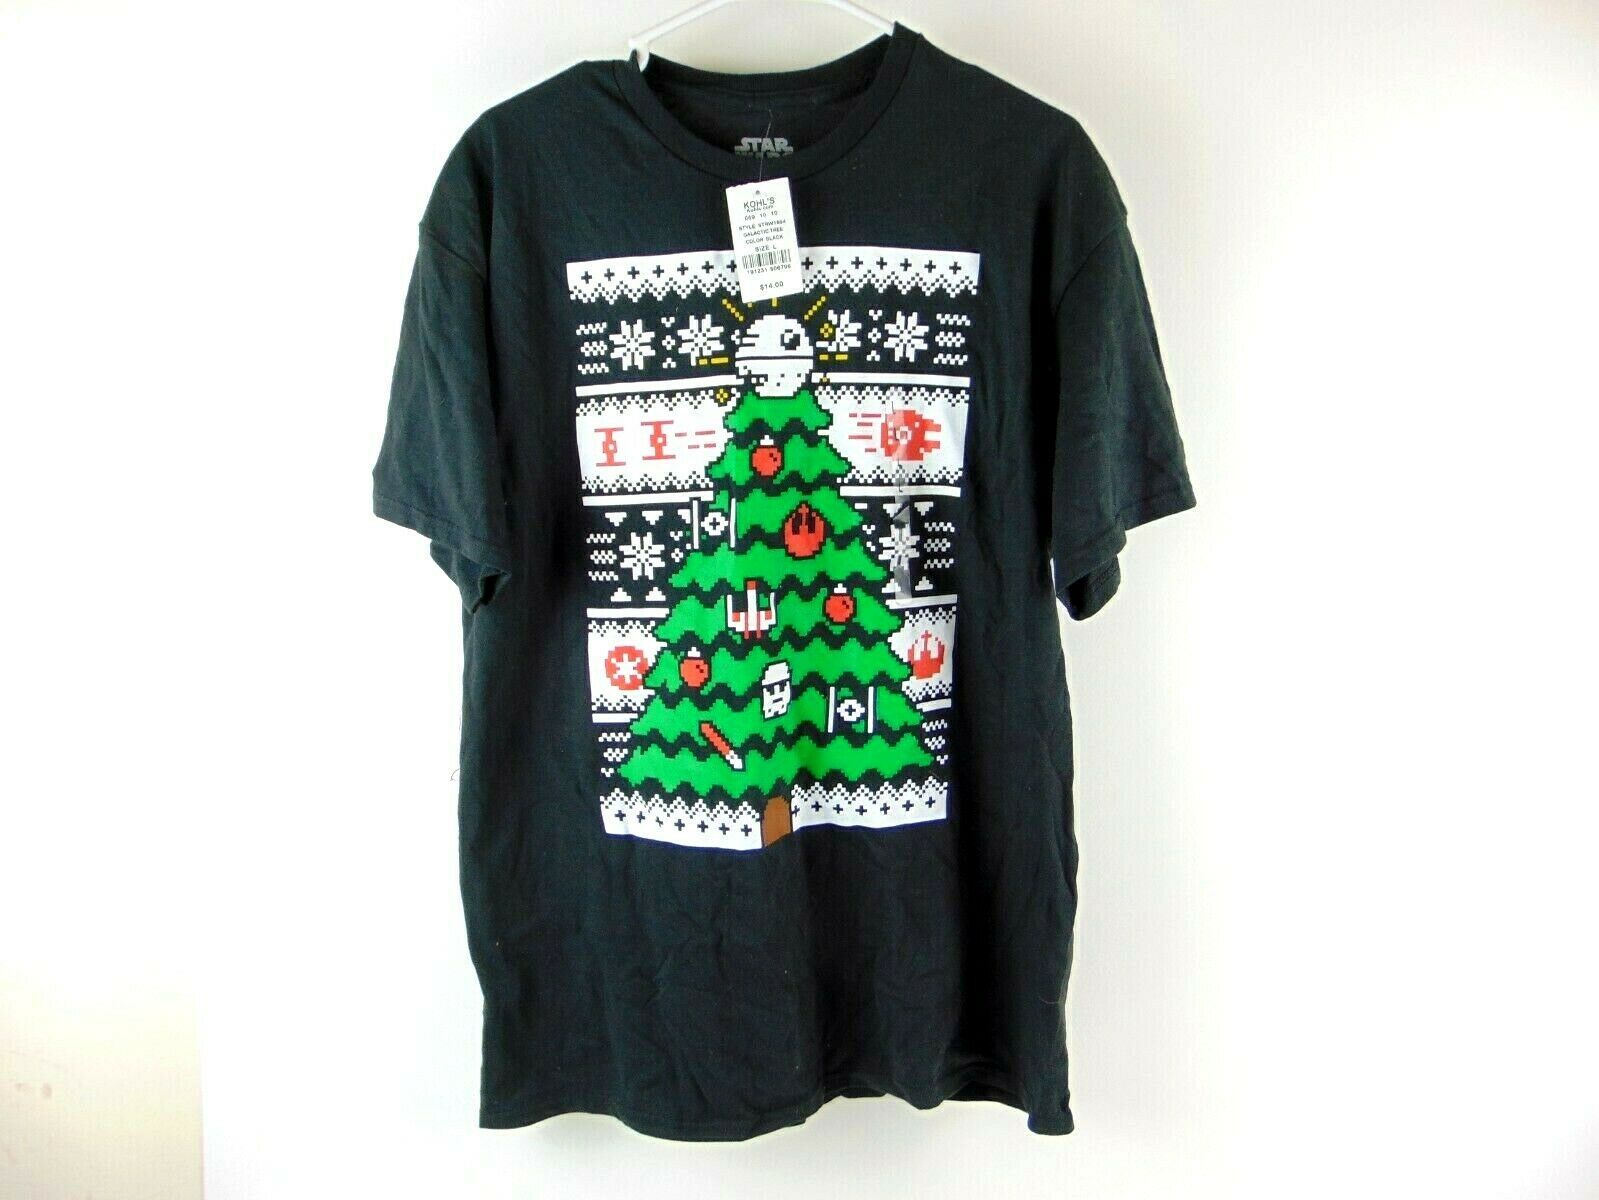 Primary image for Star Wars Galactic Tree Holiday Tee Black/Multi Size L nwt